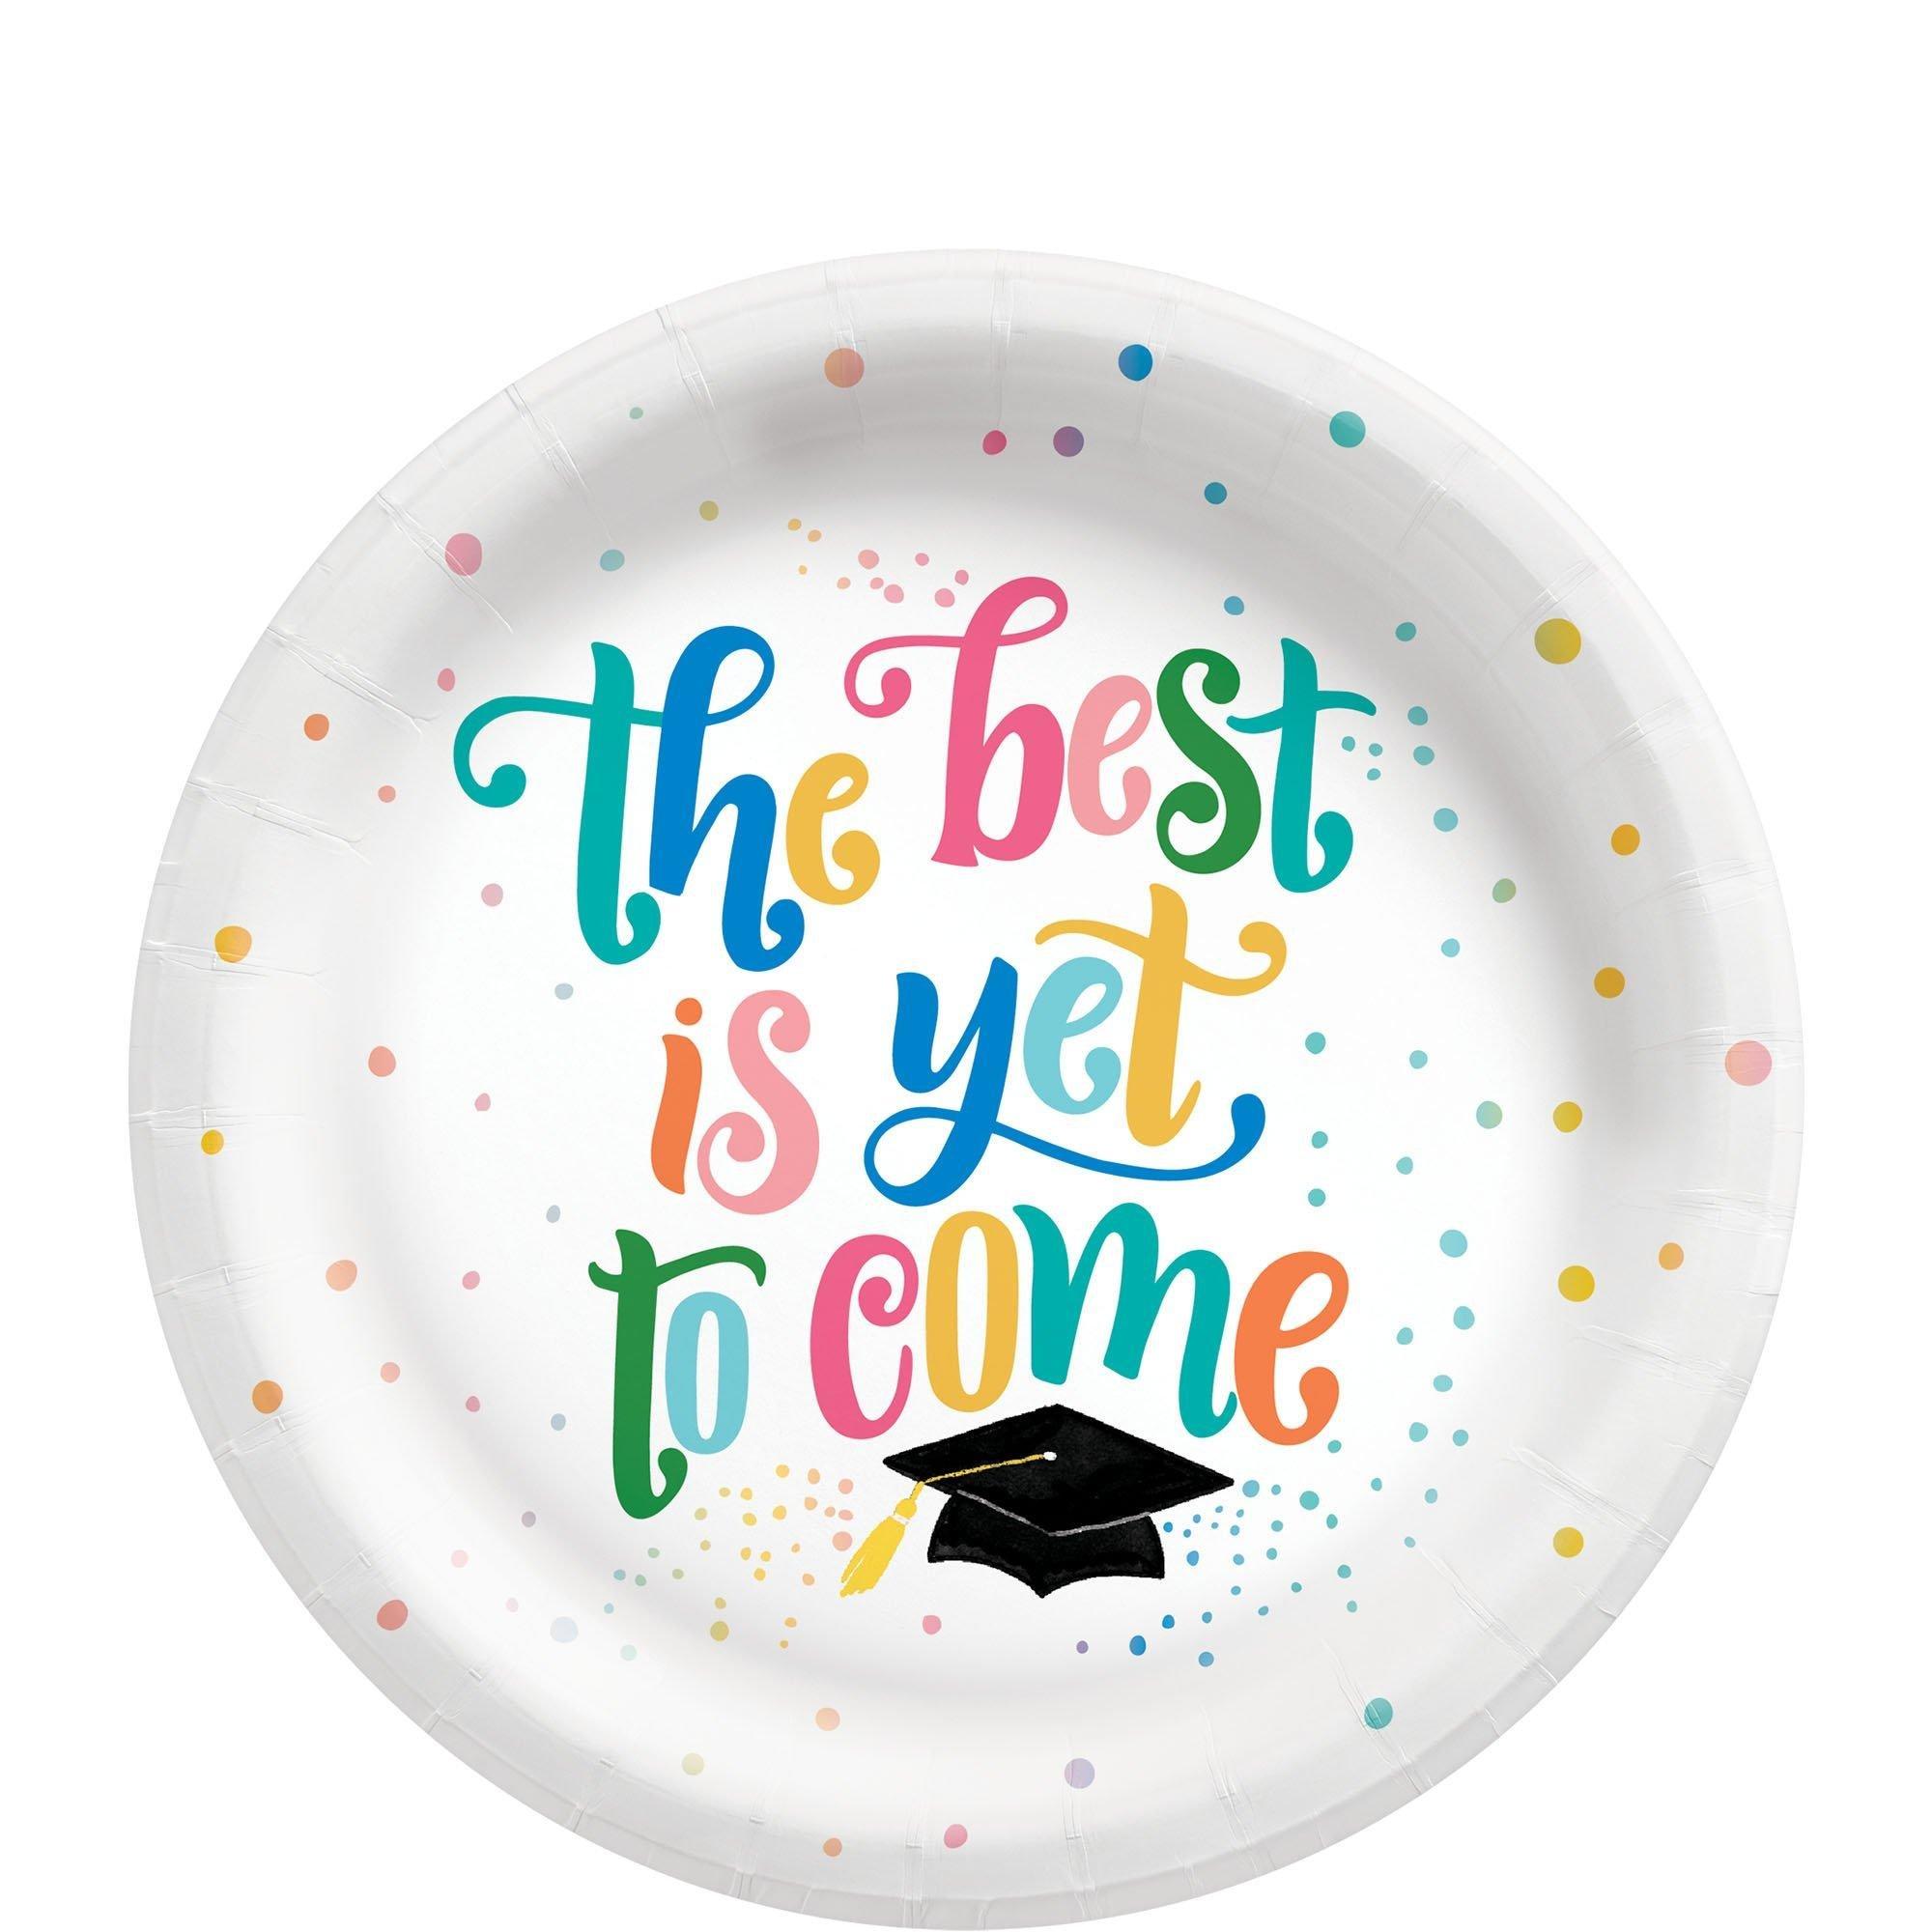 Graduation Party Supplies Kit for 40 with Decorations, Plates, Napkins, Cups - Follow Your Dreams